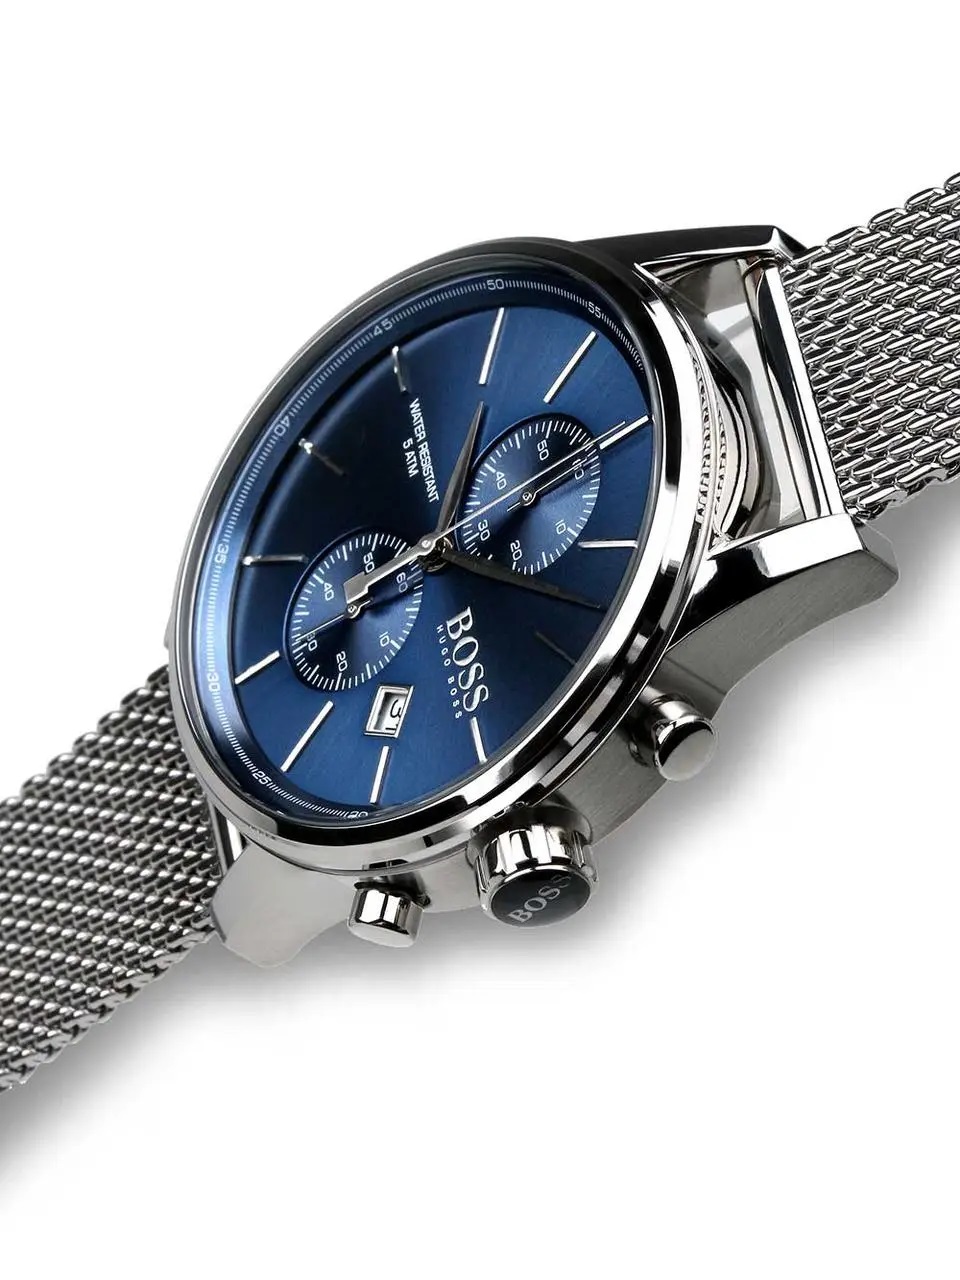 ĐỒNG HỒ ĐEO TAY NAM HUGO BOSS 1513441 MENS JET STAINLESS STEEL BLUE DIAL MESH STRAP CHRONOGRAPH WATCH 3